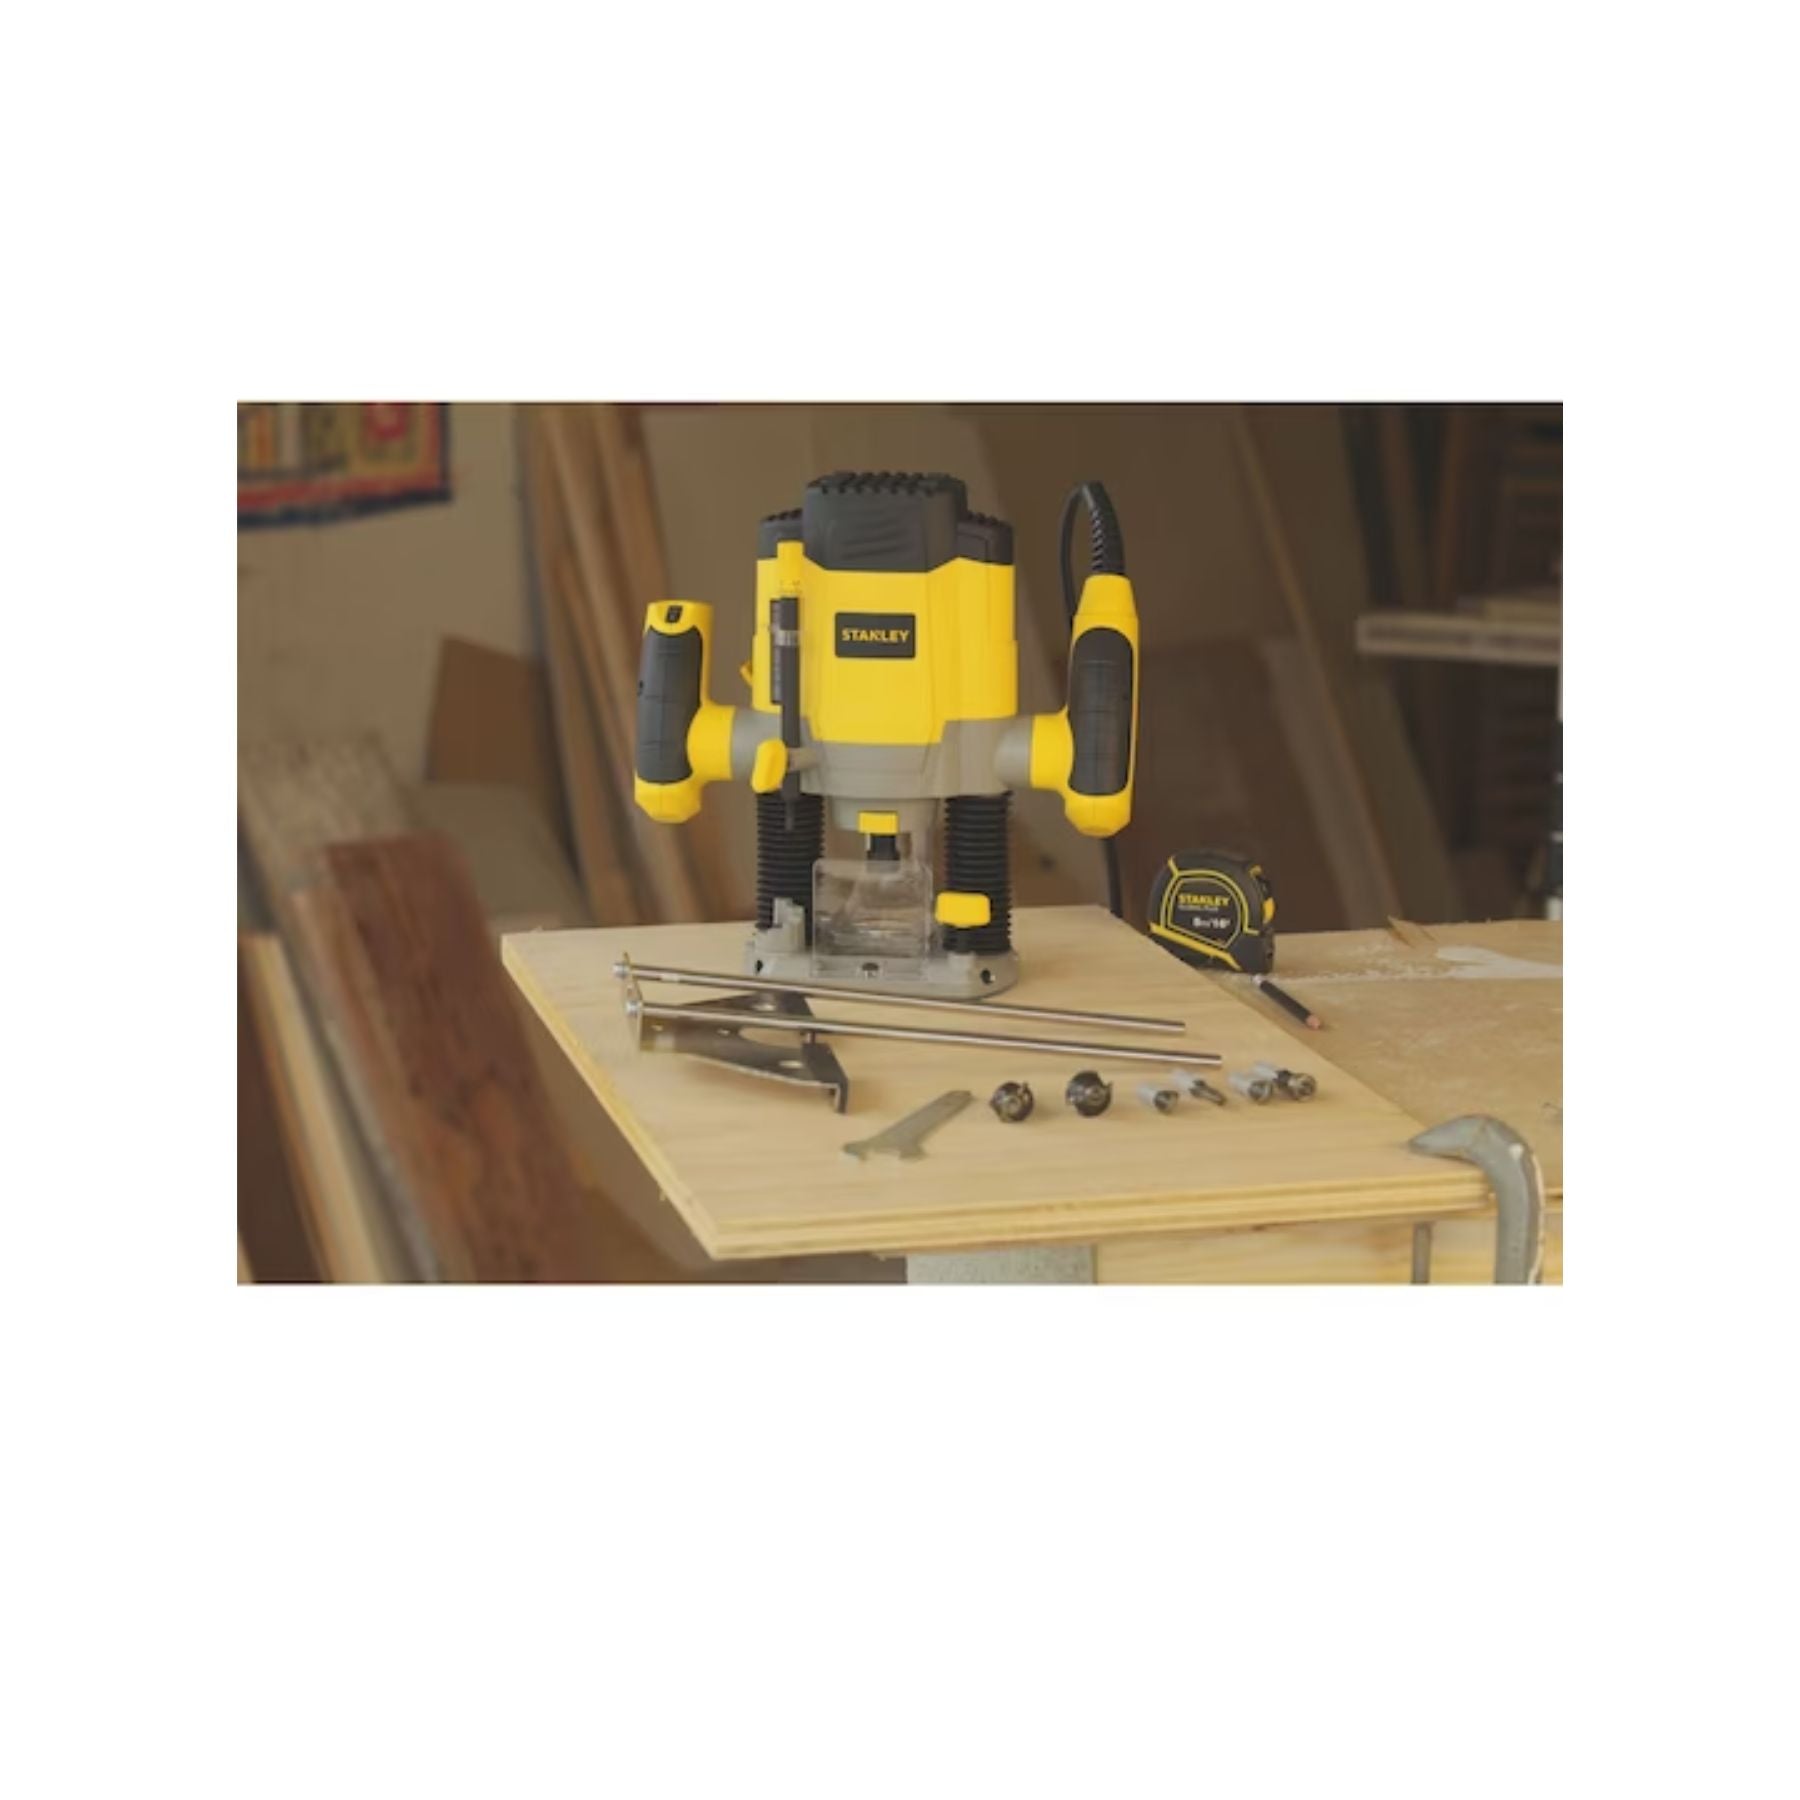 Stanley (SRR1200-IN) 1200W Variable Speed Plunge Router